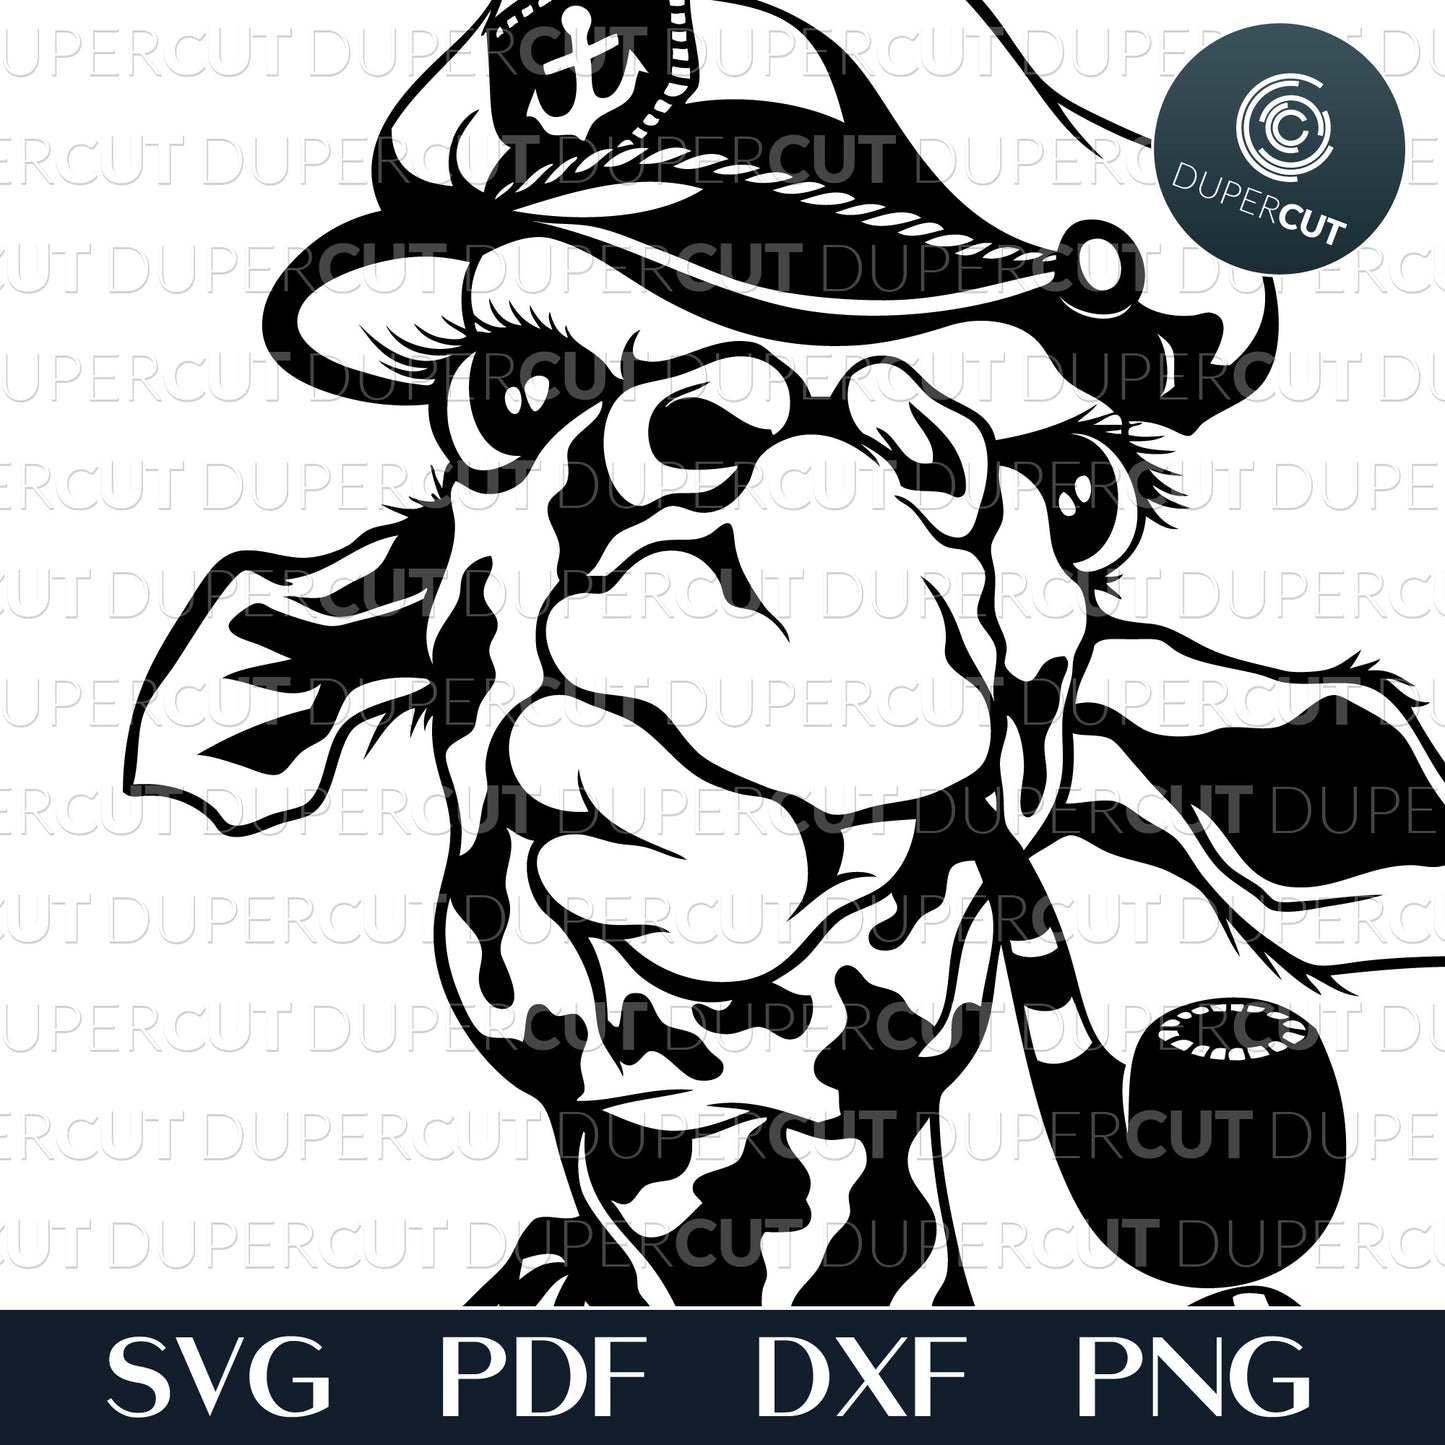 Funky giraffe caricature, funny animals. SVG PNG DXF cutting files for Cricut, Silhouette, Glowforge, print on demand, sublimation templates